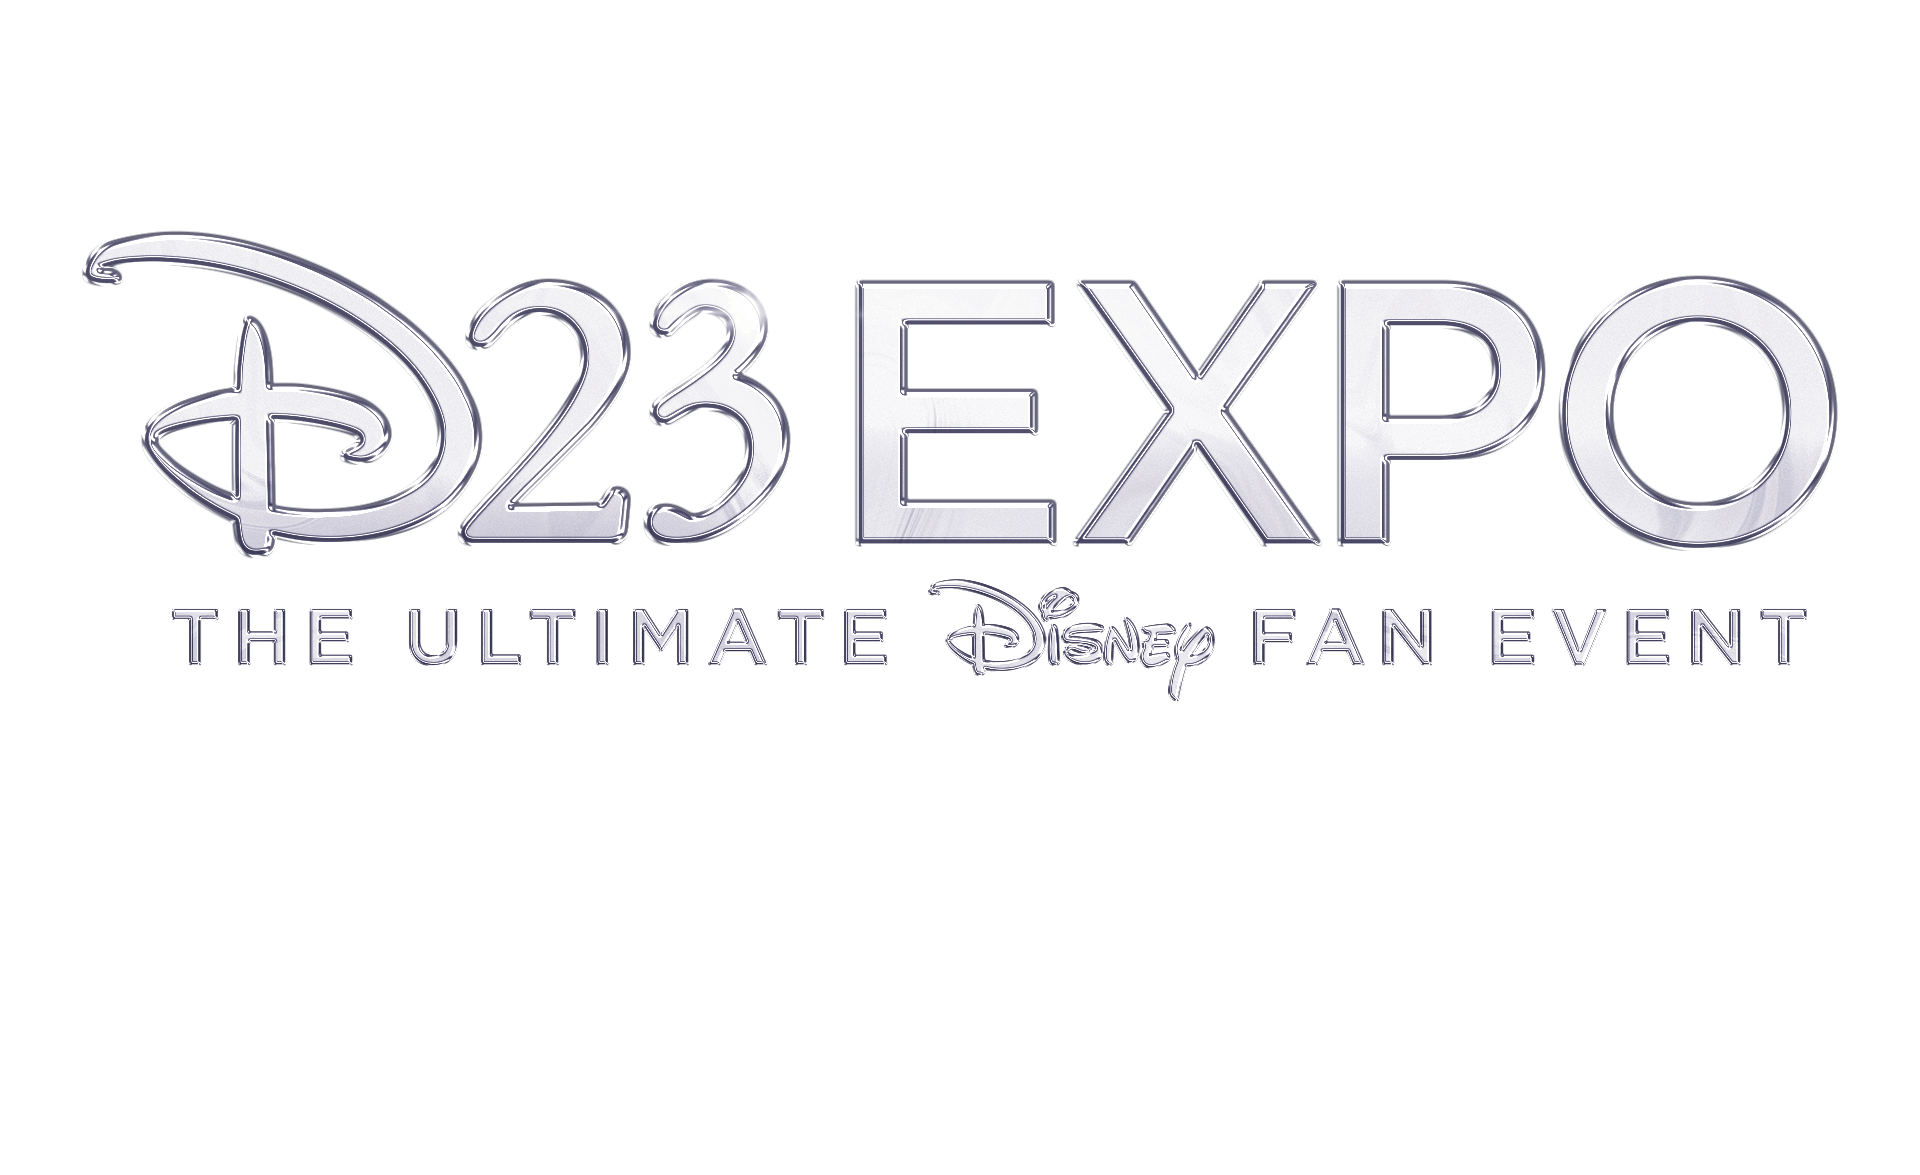 D23 Expo presented by Visa